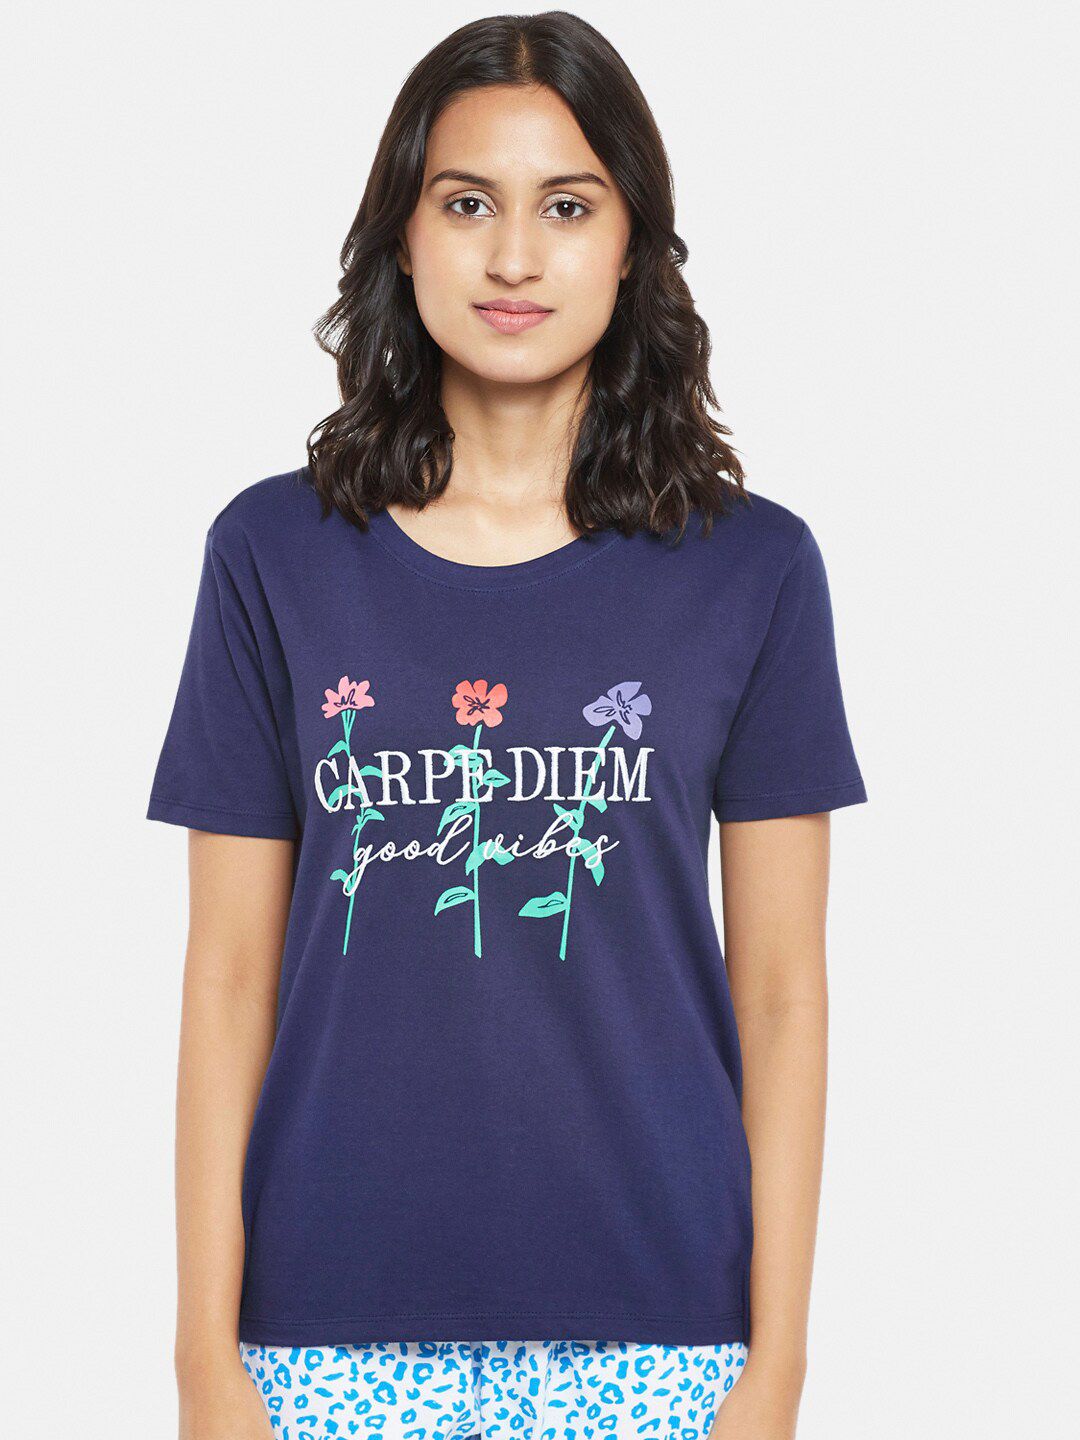 Dreamz by Pantaloons Women Navy Blue & White Typography Printed Cotton Lounge T-shirt Price in India